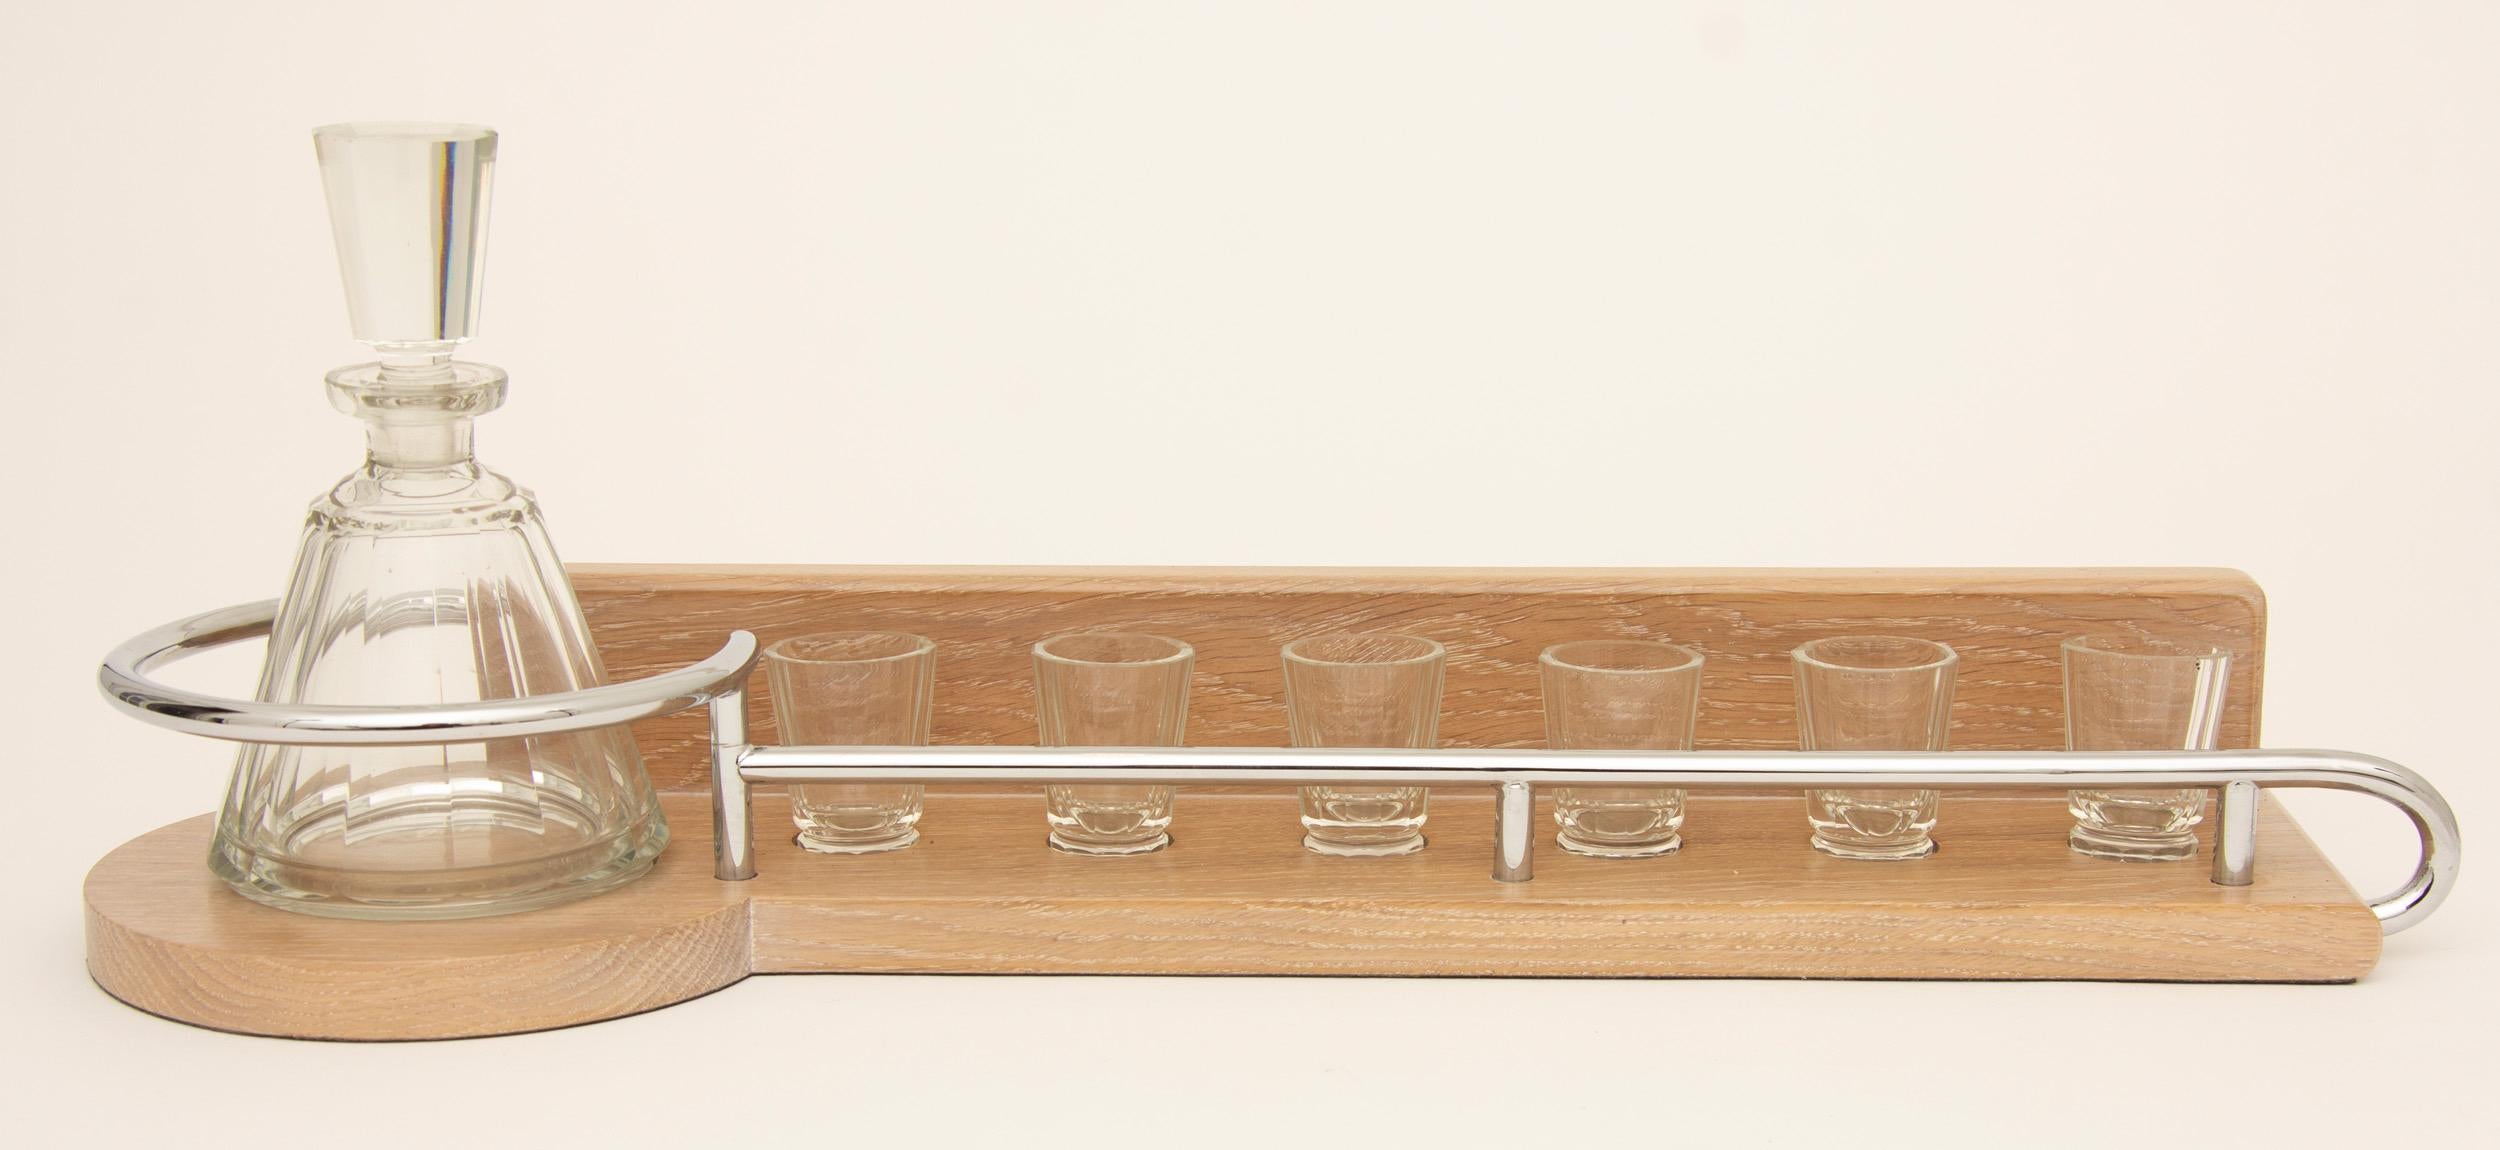 French Art Deco cut crystal liquor set with a modernist limed oak and chrome tray.
Beautifully presented Art Deco liquor set by the renowned designer Adnet.
French, circa 1930.
Measures: H 21 cm, W 60 cm, D 18 cm.